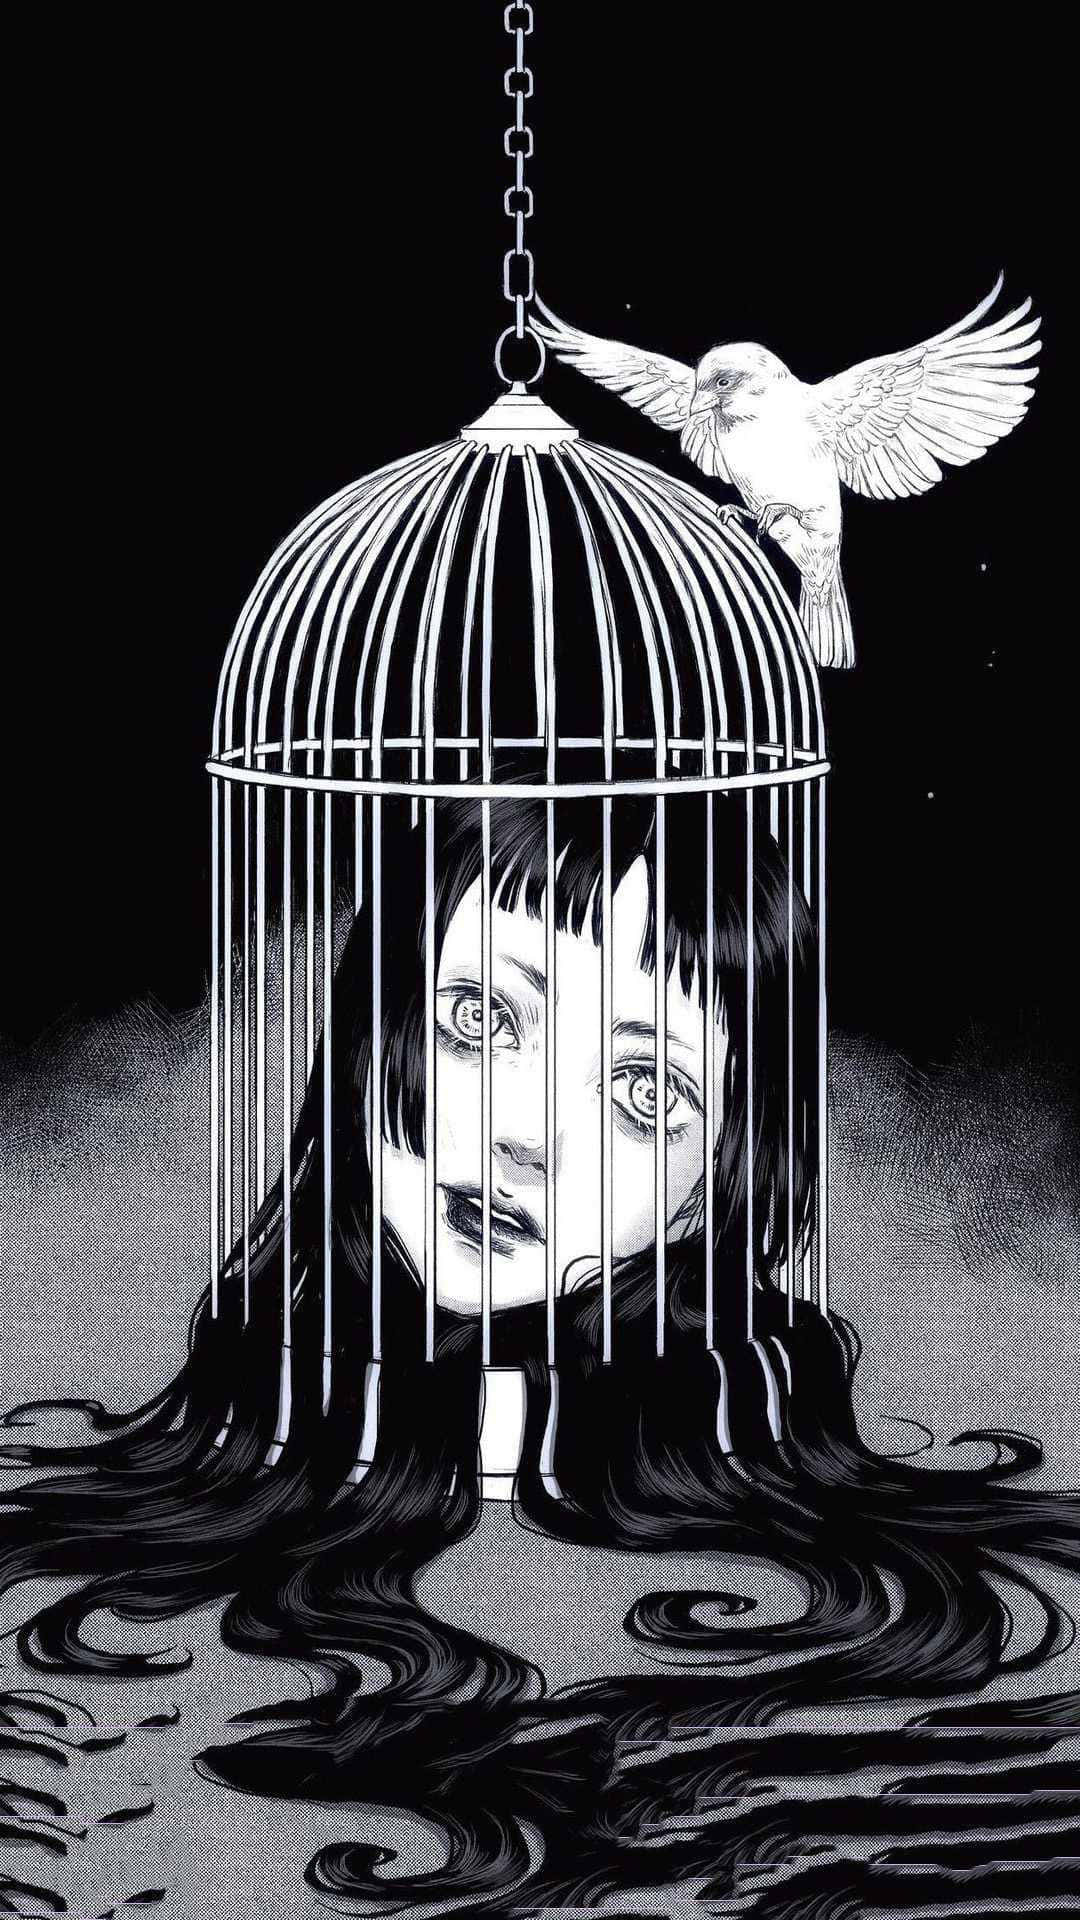 A girl with black hair is trapped in a cage. - Creepy